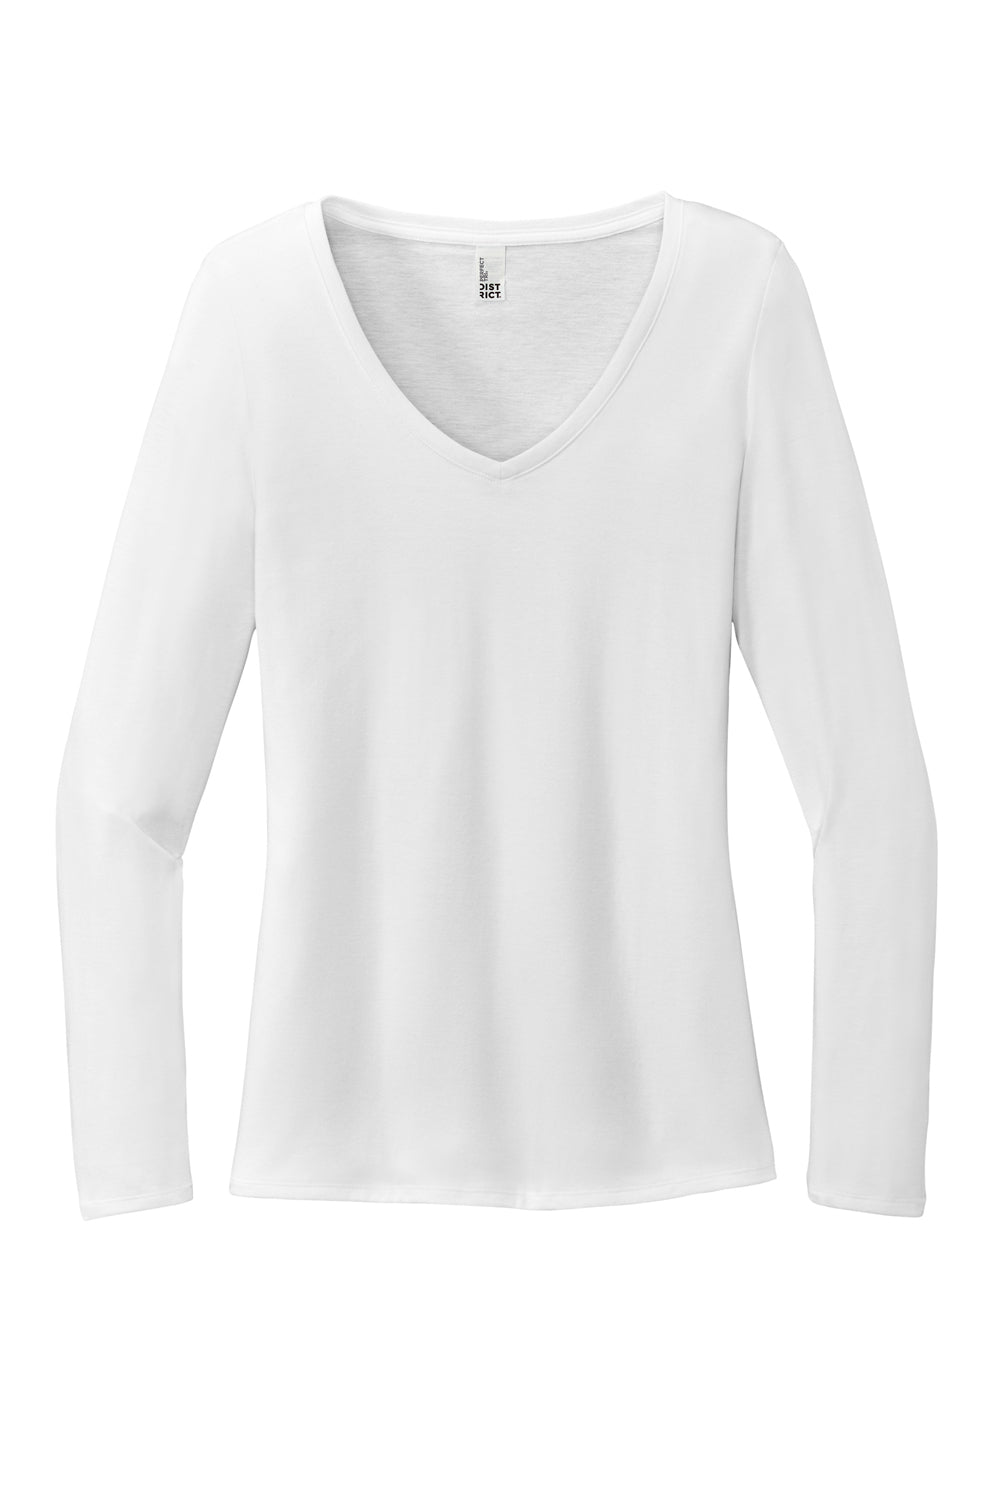 District DT135 Womens Perfect Tri Long Sleeve V-Neck T-Shirt White Flat Front